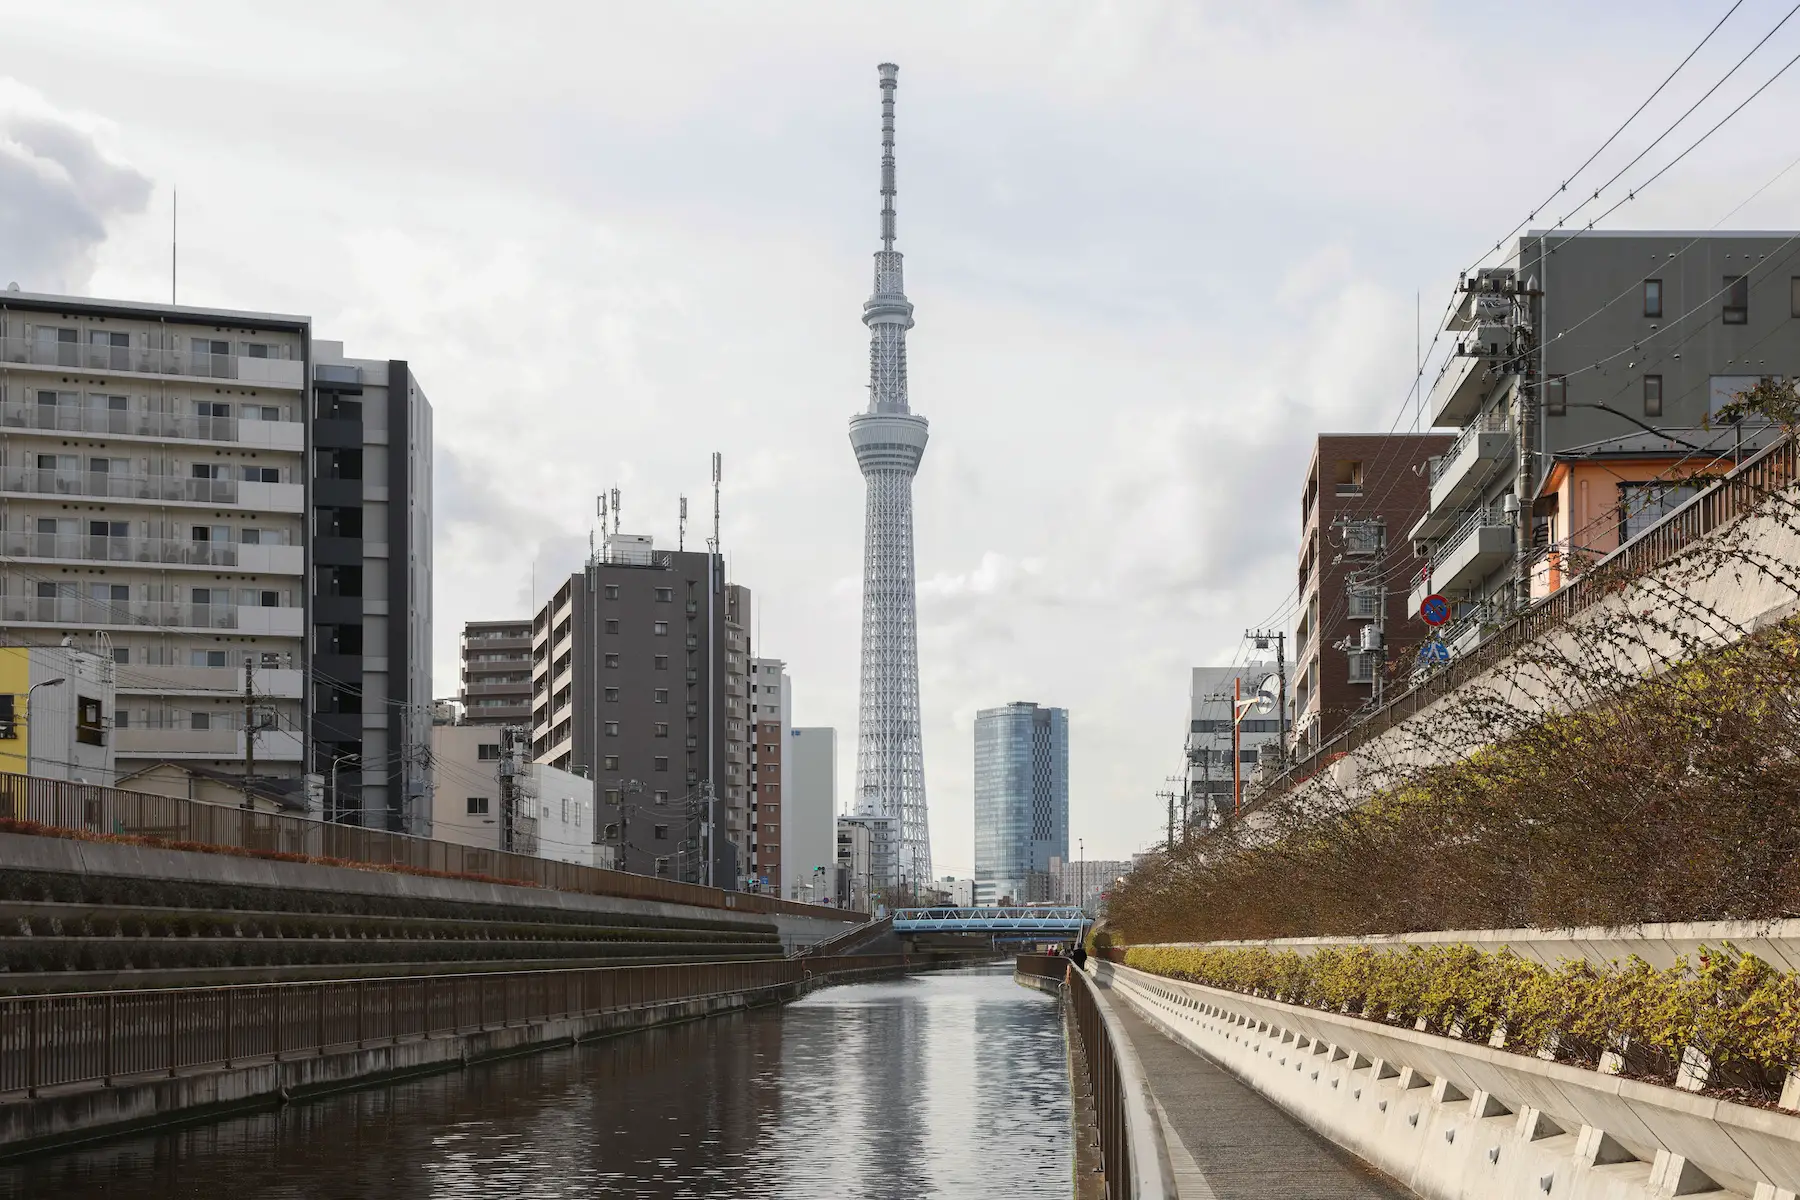 A view of the Tokyo Skytree radio and television broadcasting tower which stands high in the sky on a cloudy day